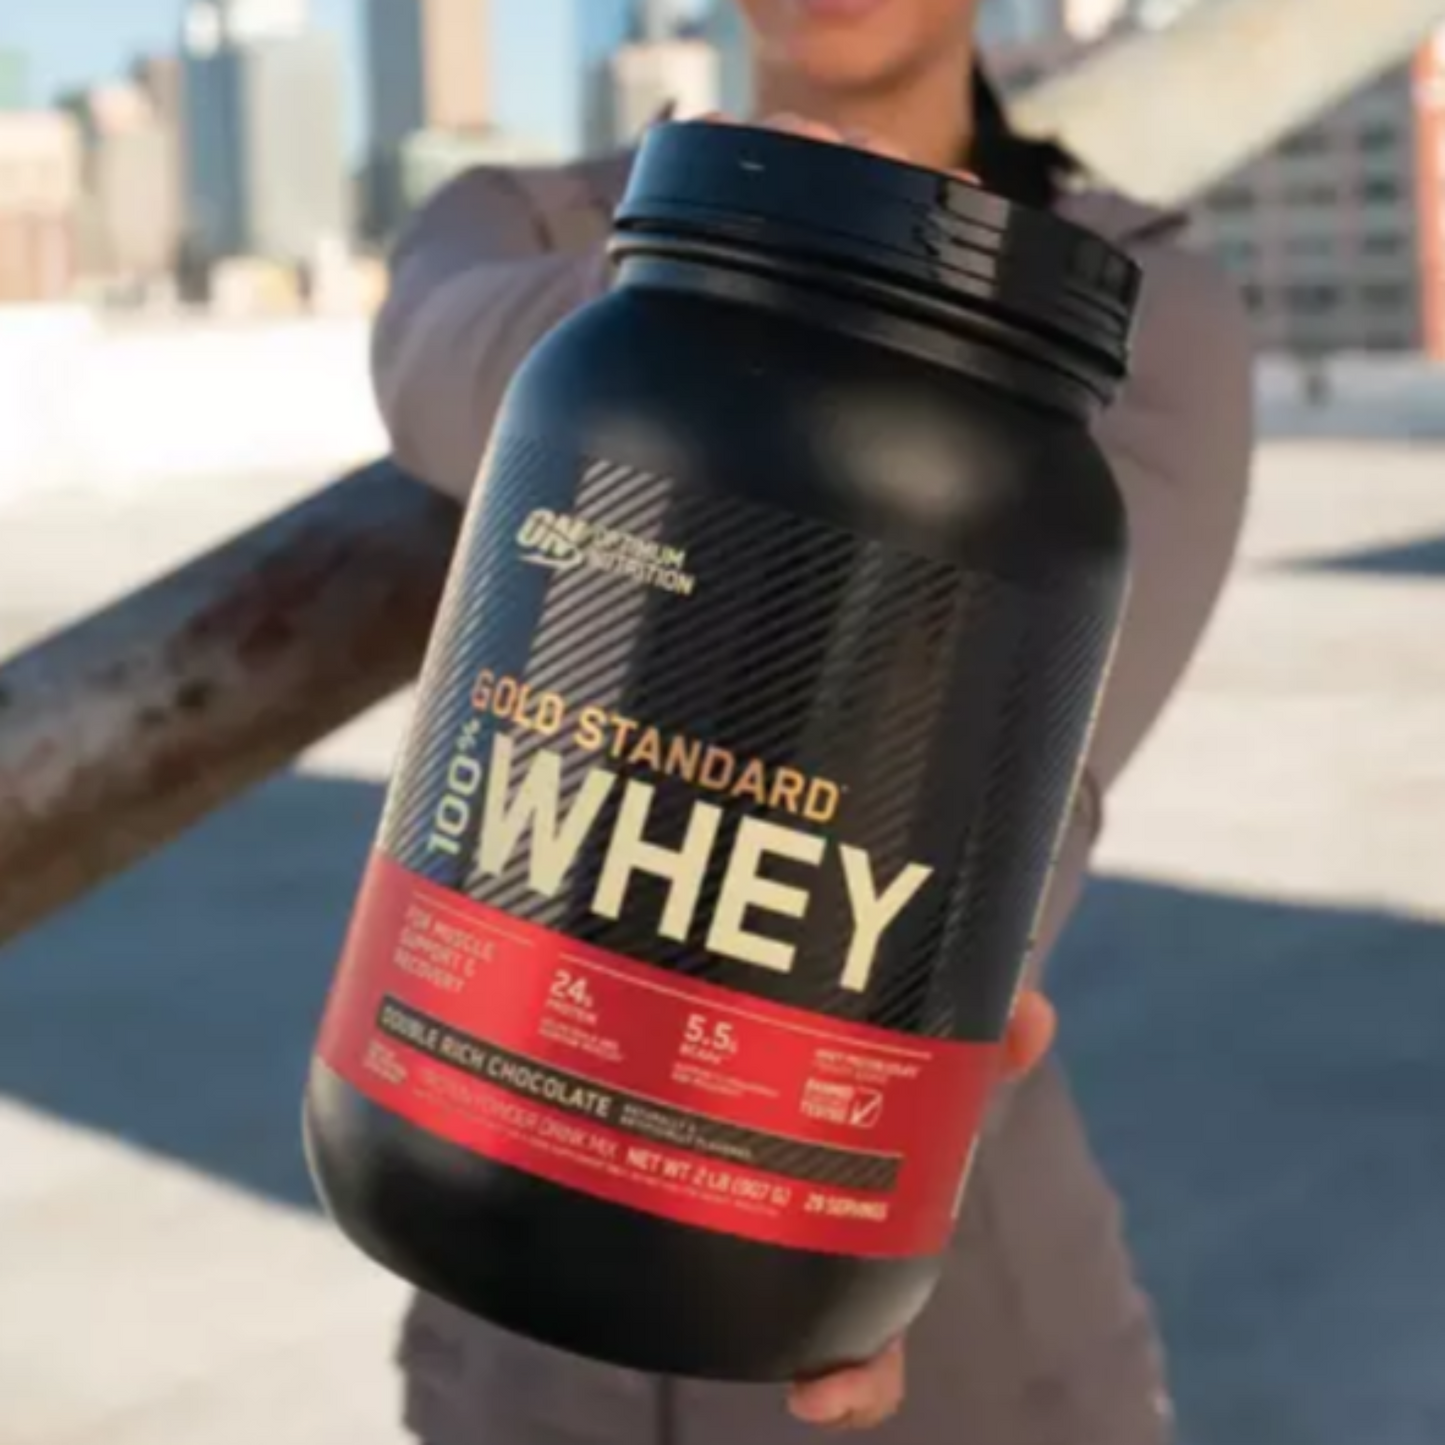 GOLD STANDARD WHEY PROTEIN ISOLATION